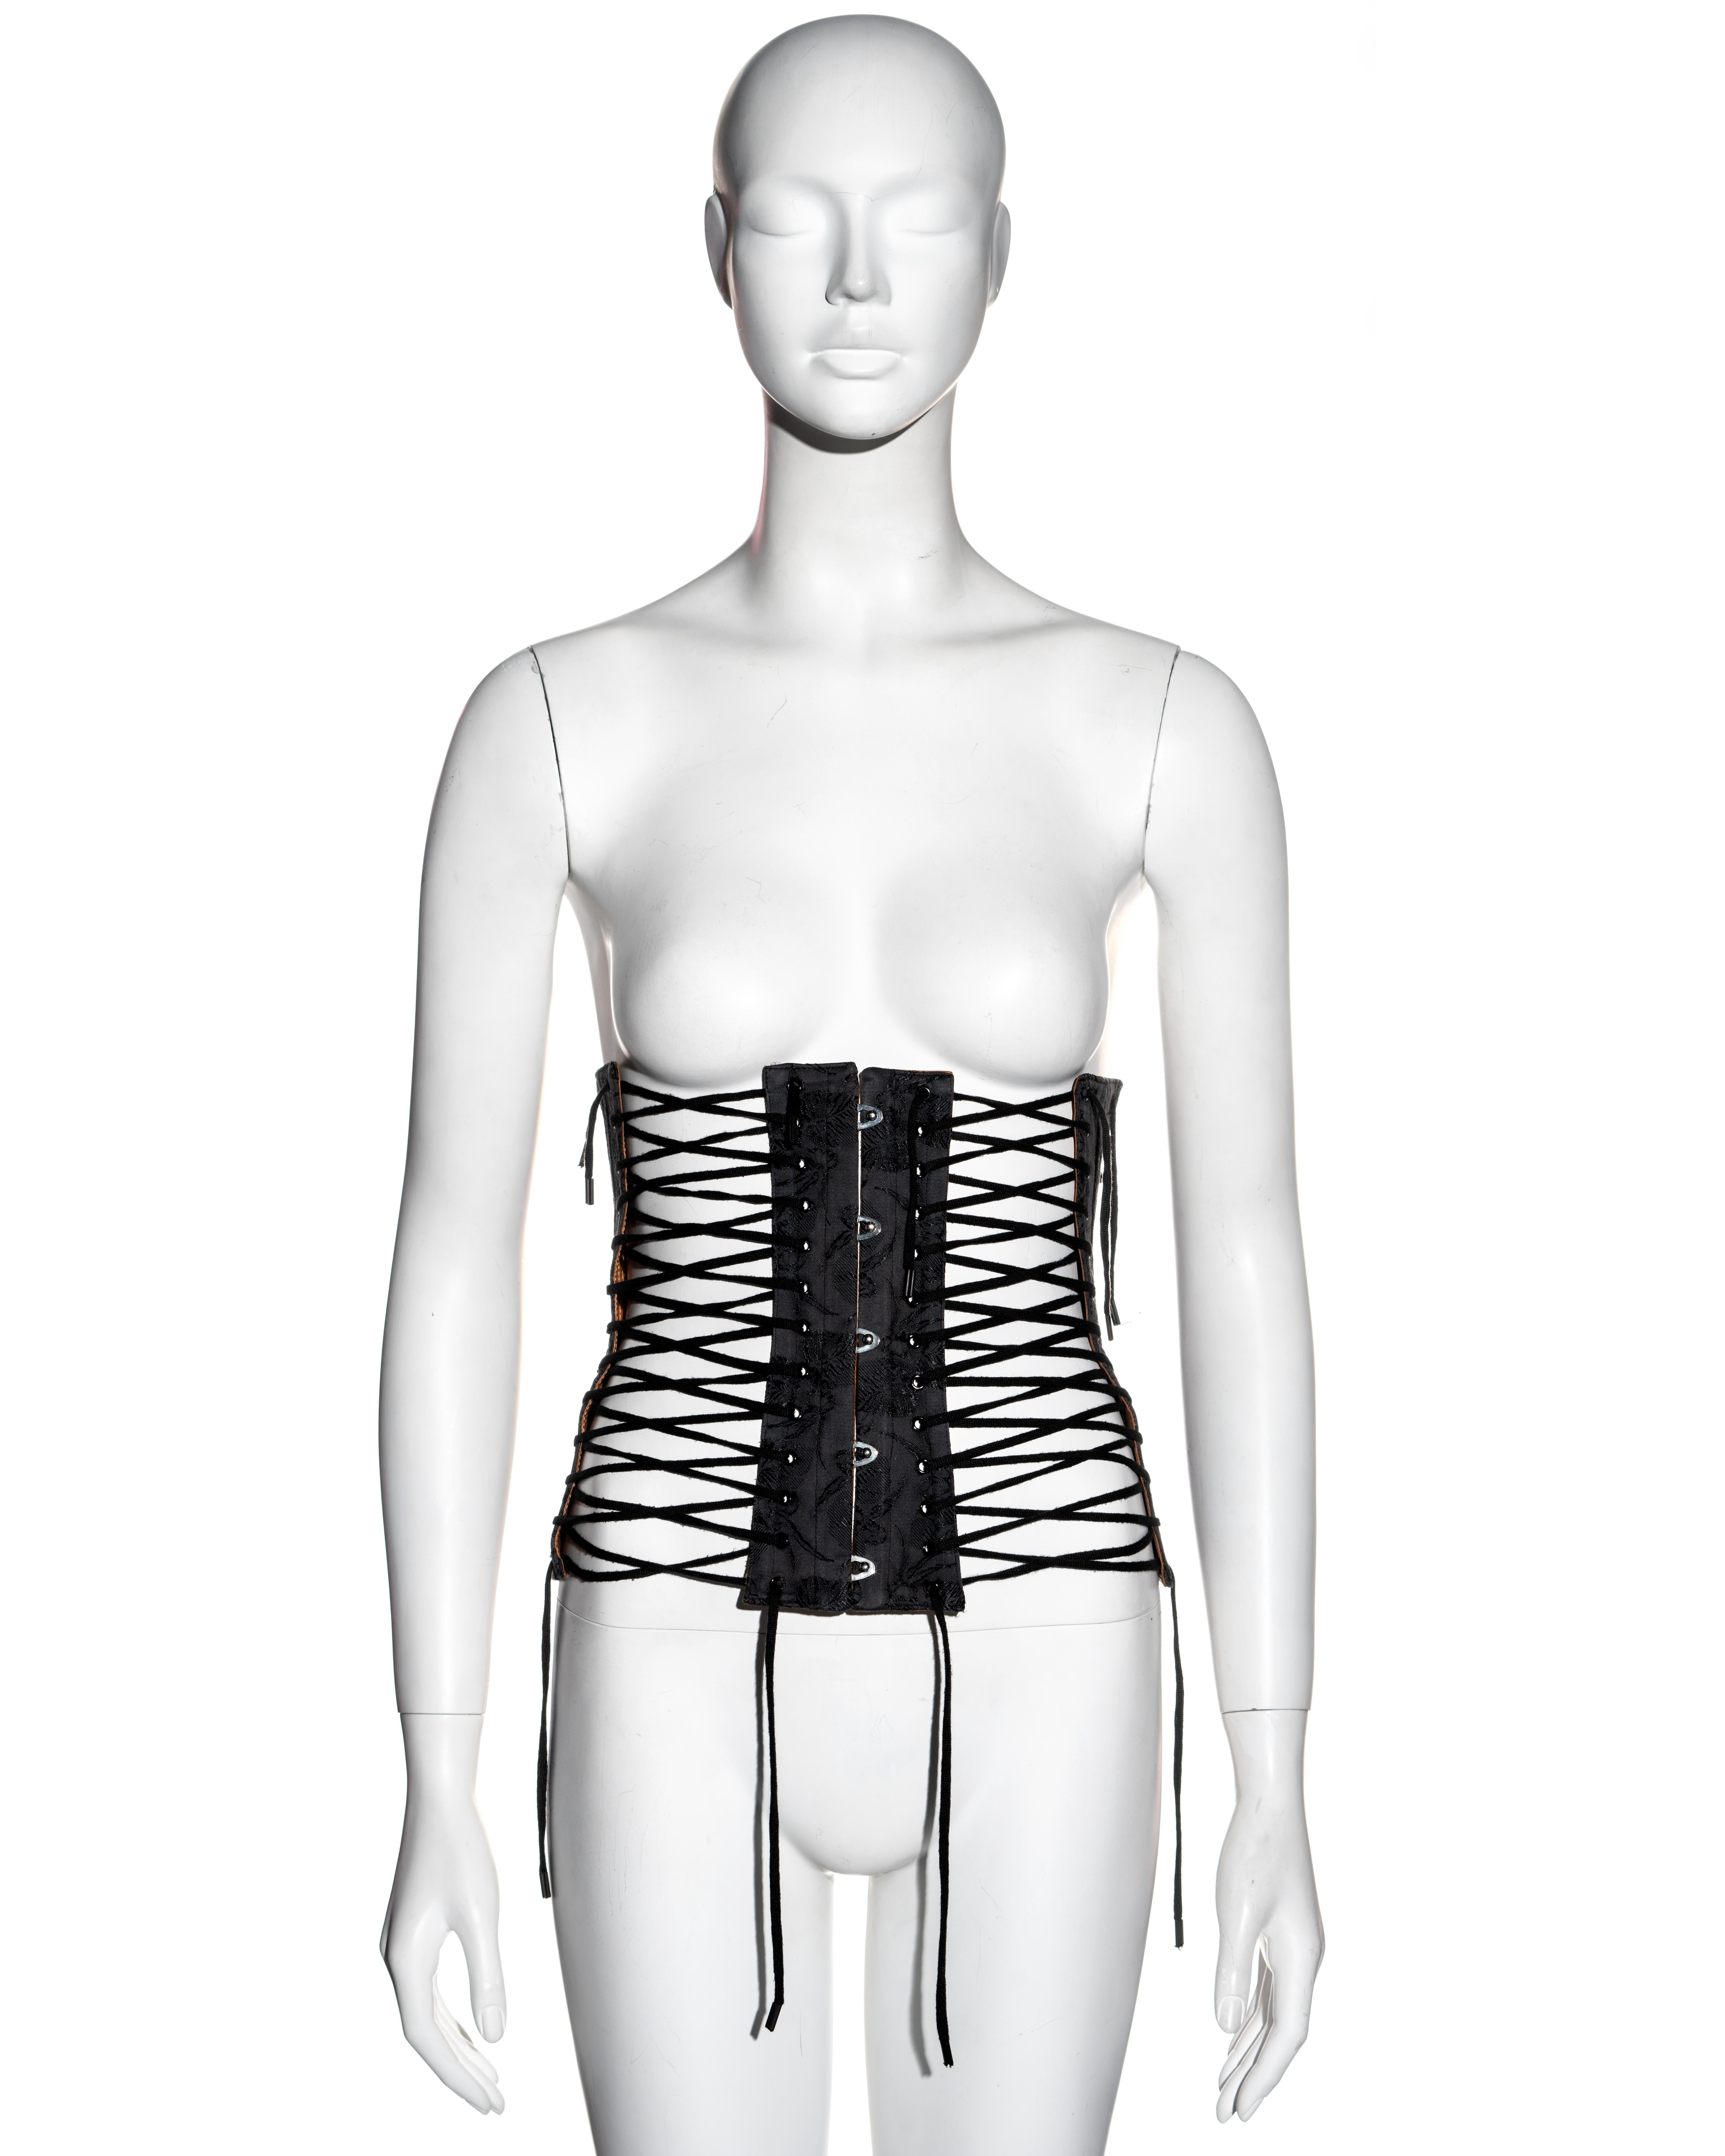 ▪ Jean Paul Gaultier black jacquard cotton corset 
▪ 56% Cotton, 44% Rayon 
▪ Tan leather backing 
▪ 4 lace up openings 
▪ Metal corset hook fasteners at centre front 
▪ IT 38 - FR 34 - UK 6 - US 4
▪ Spring-Summer 2004